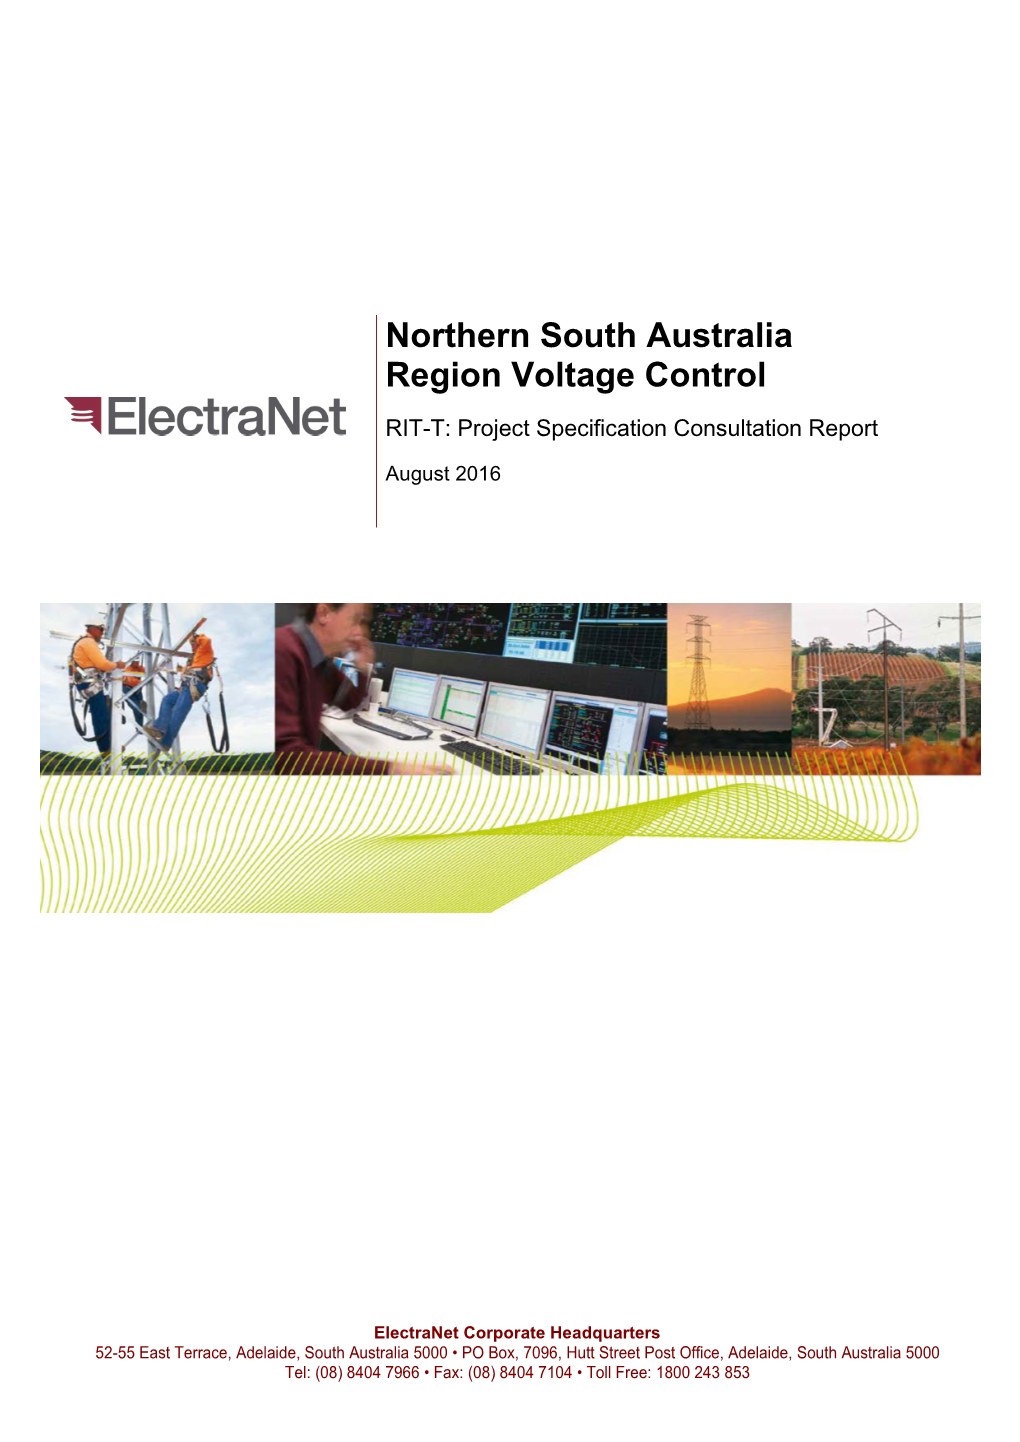 Northern South Australia Region Voltage Control RIT-T: Project Specification Consultation Report